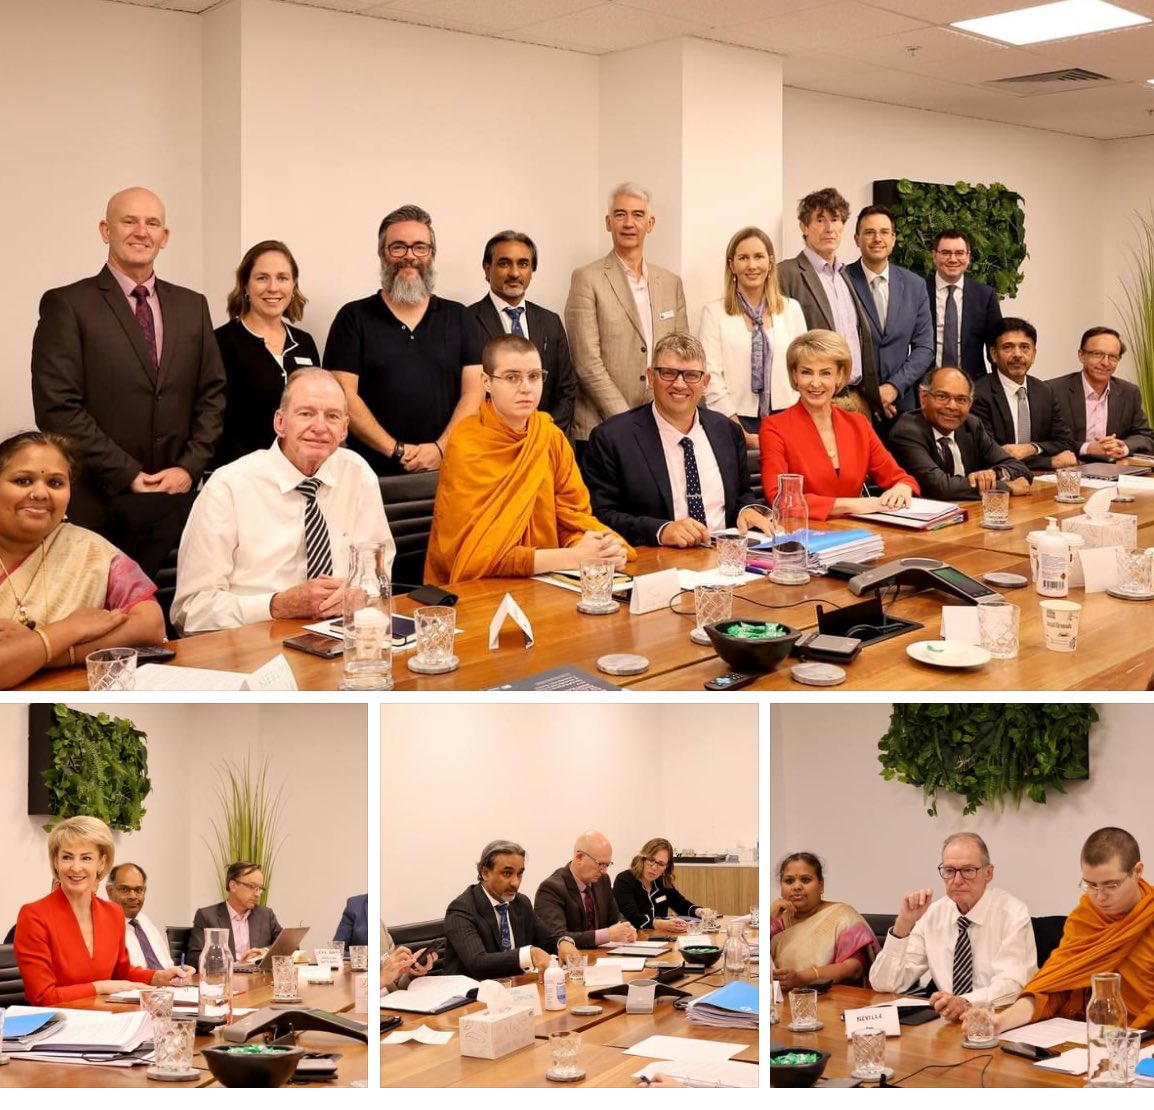 Thank you to the faith leaders & representatives from the Christian, Jewish, Islamic, Buddhist & Hindu communities who met with me in Sydney to discuss their concerns with Mr Albanese’s proposed changes to the way faith-based schools operate & their importance to society.